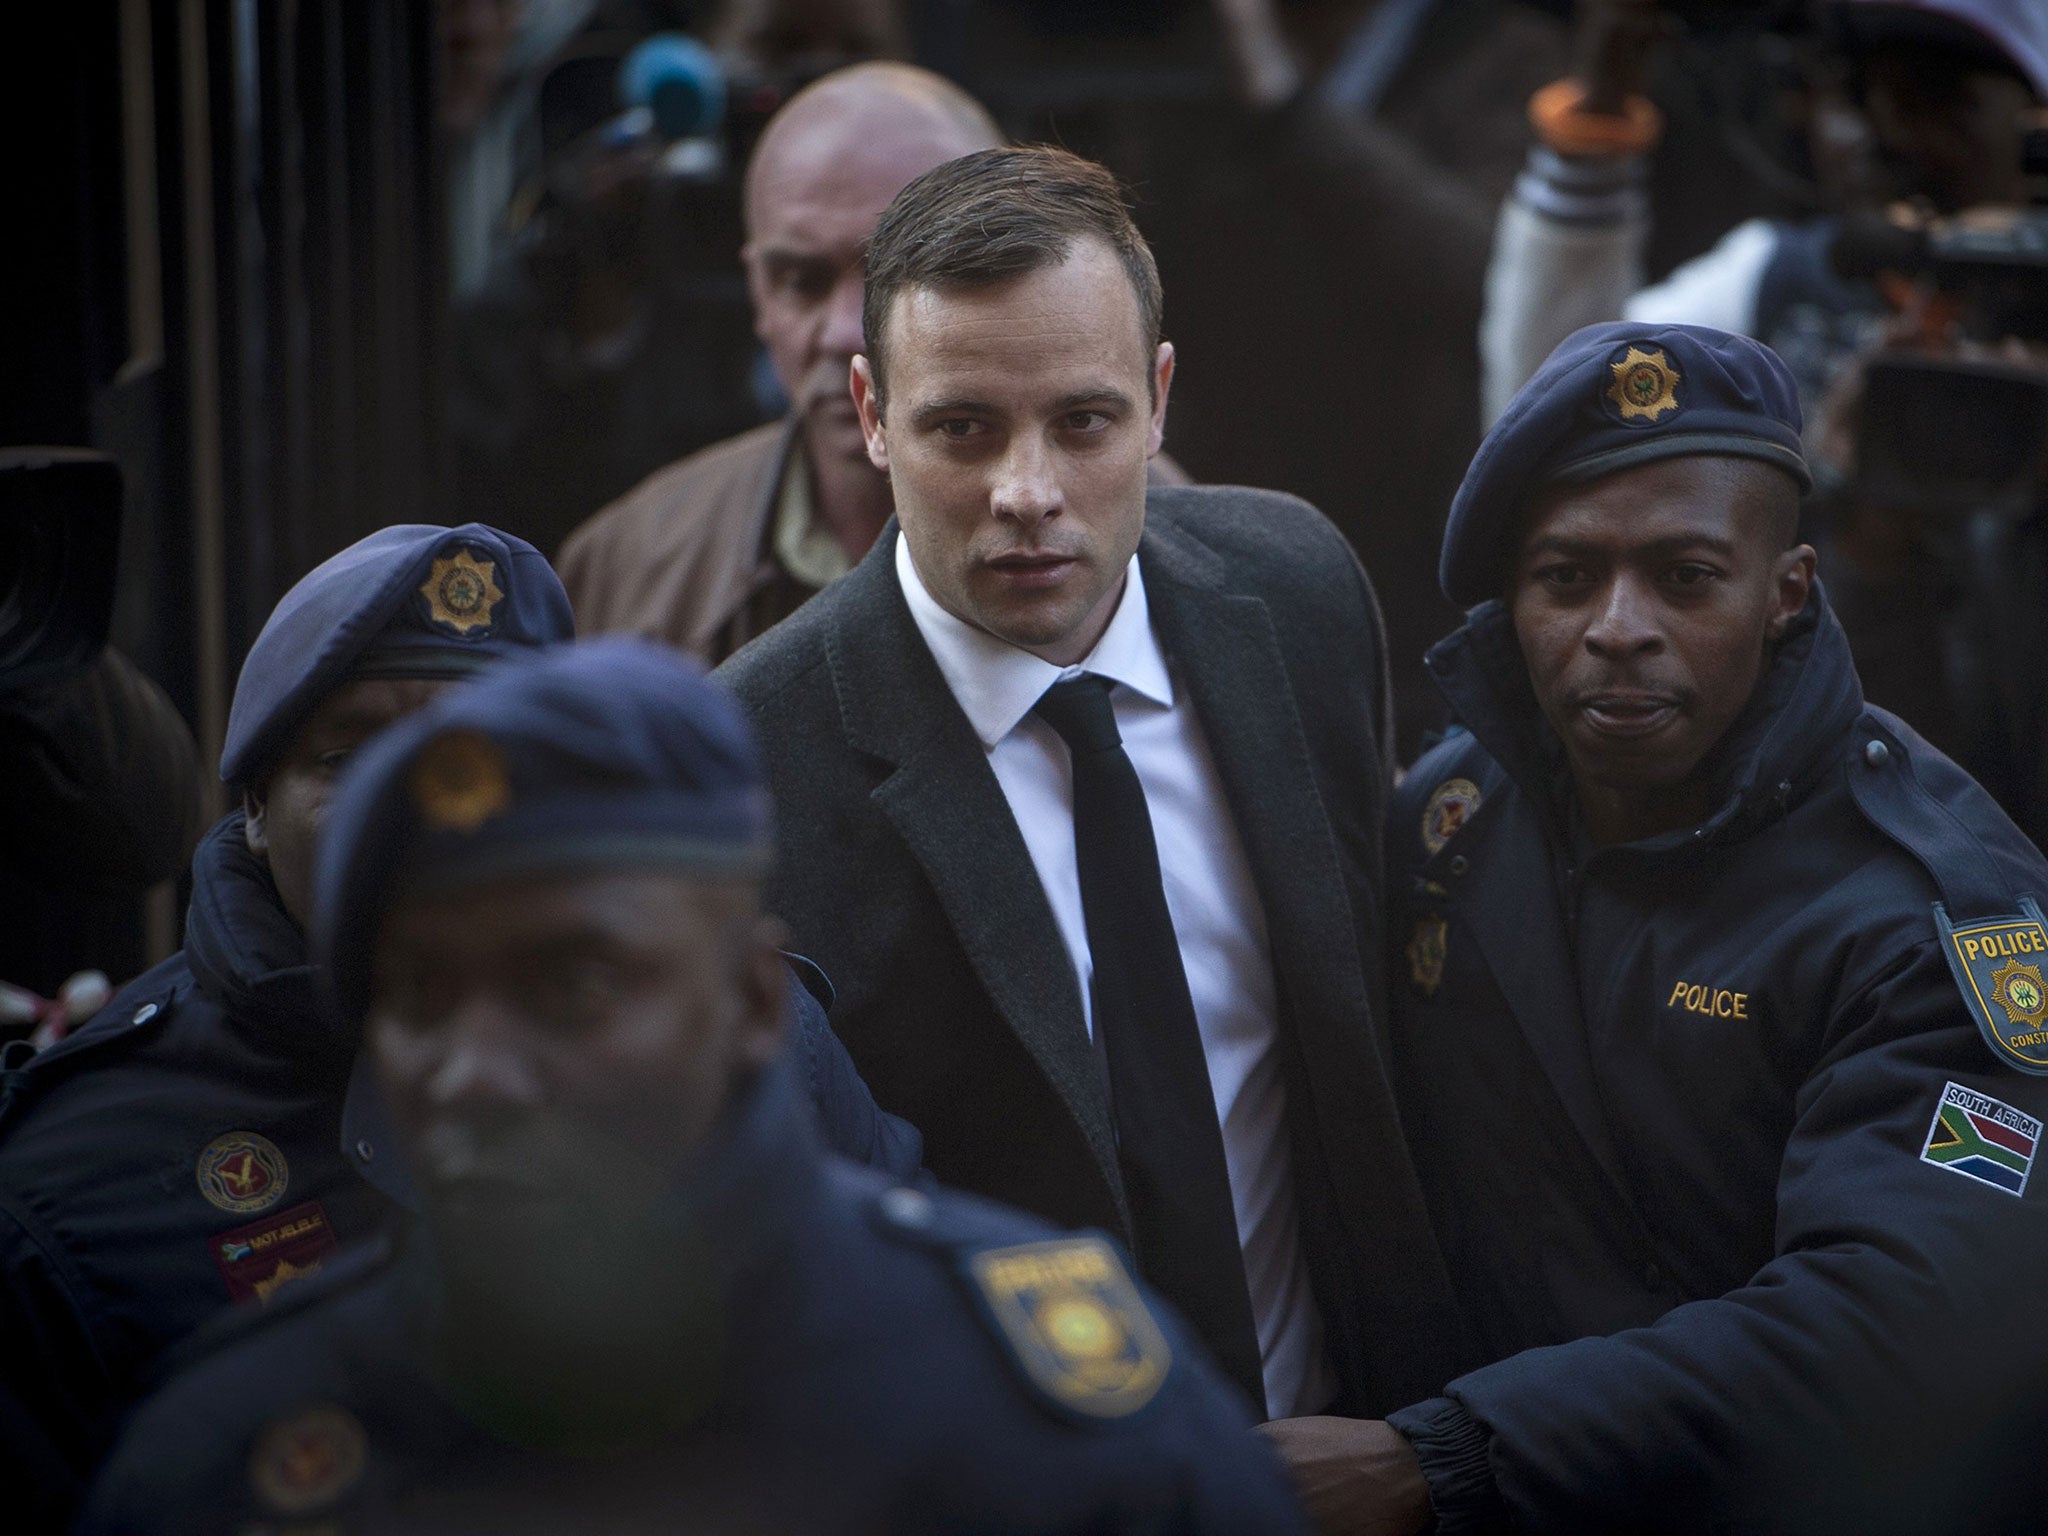 Oscar Pistorius, center, arrives at the High Court in Pretoria, South Africa Wednesday, July 6, 2016